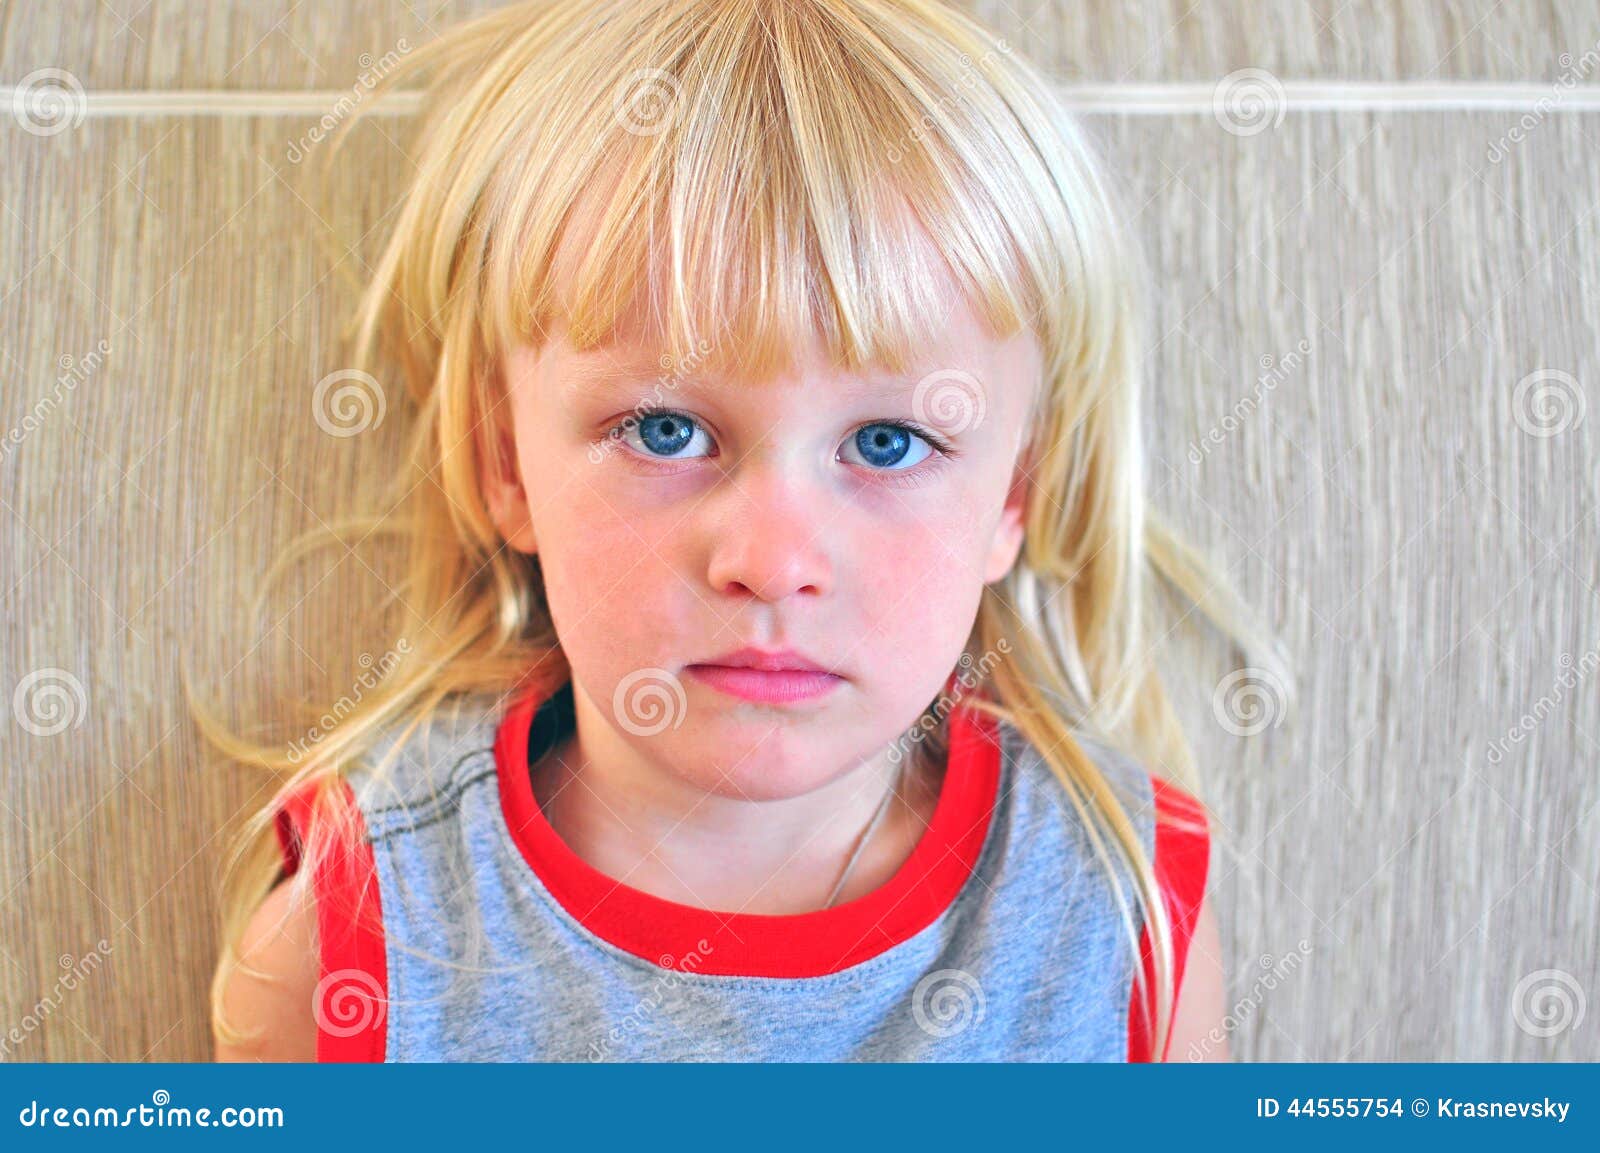 2. Adorable little boy with blonde hair and blue eyes - wide 7